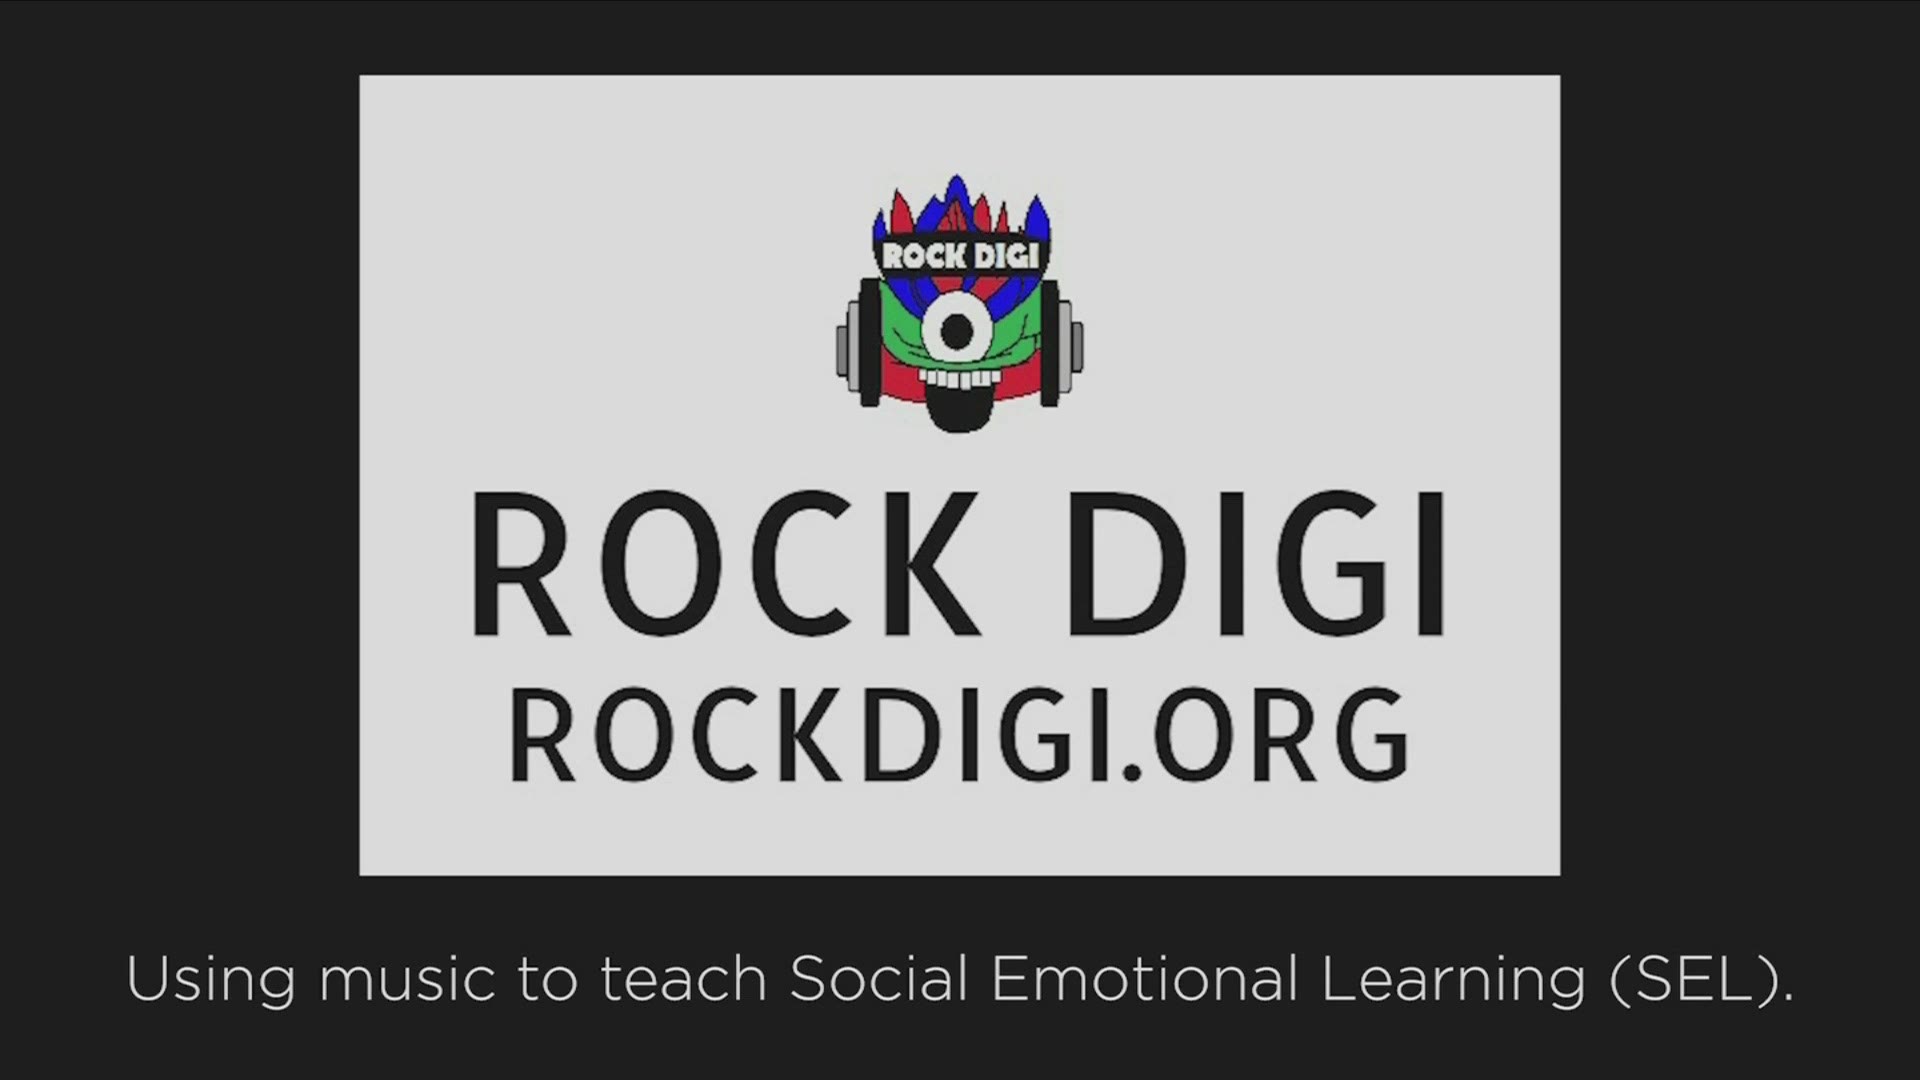 Rock Digi online curriculum teaches Social Emotional Learning and life skills for success through the use of music